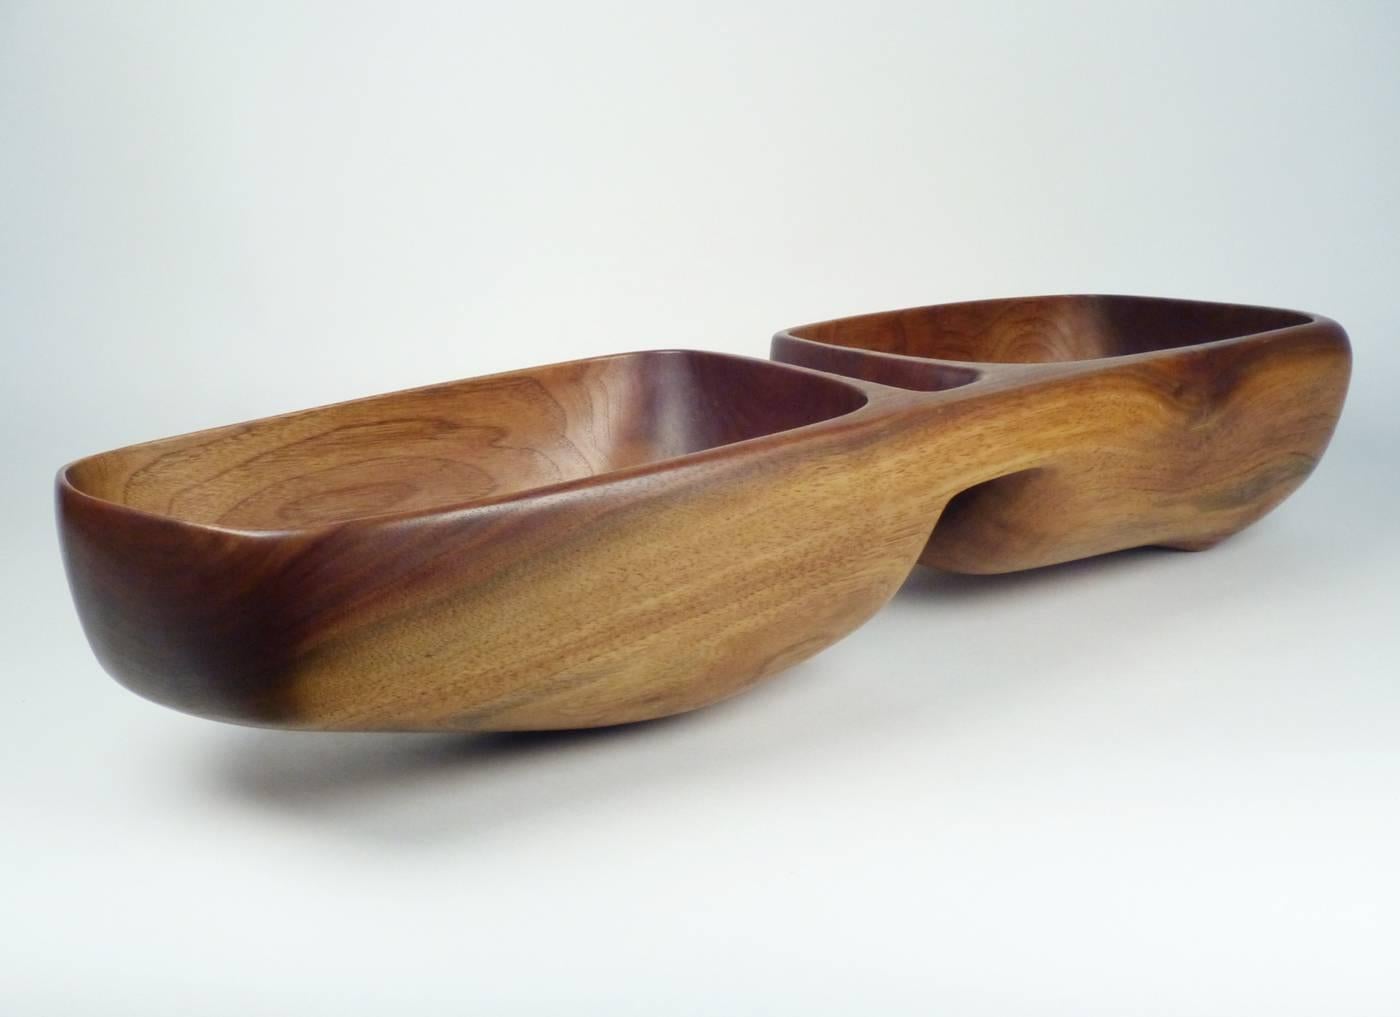 Aesthetic Movement Hand-Carved Double Lobed Vessel by Ben Rouzie, circa 1970